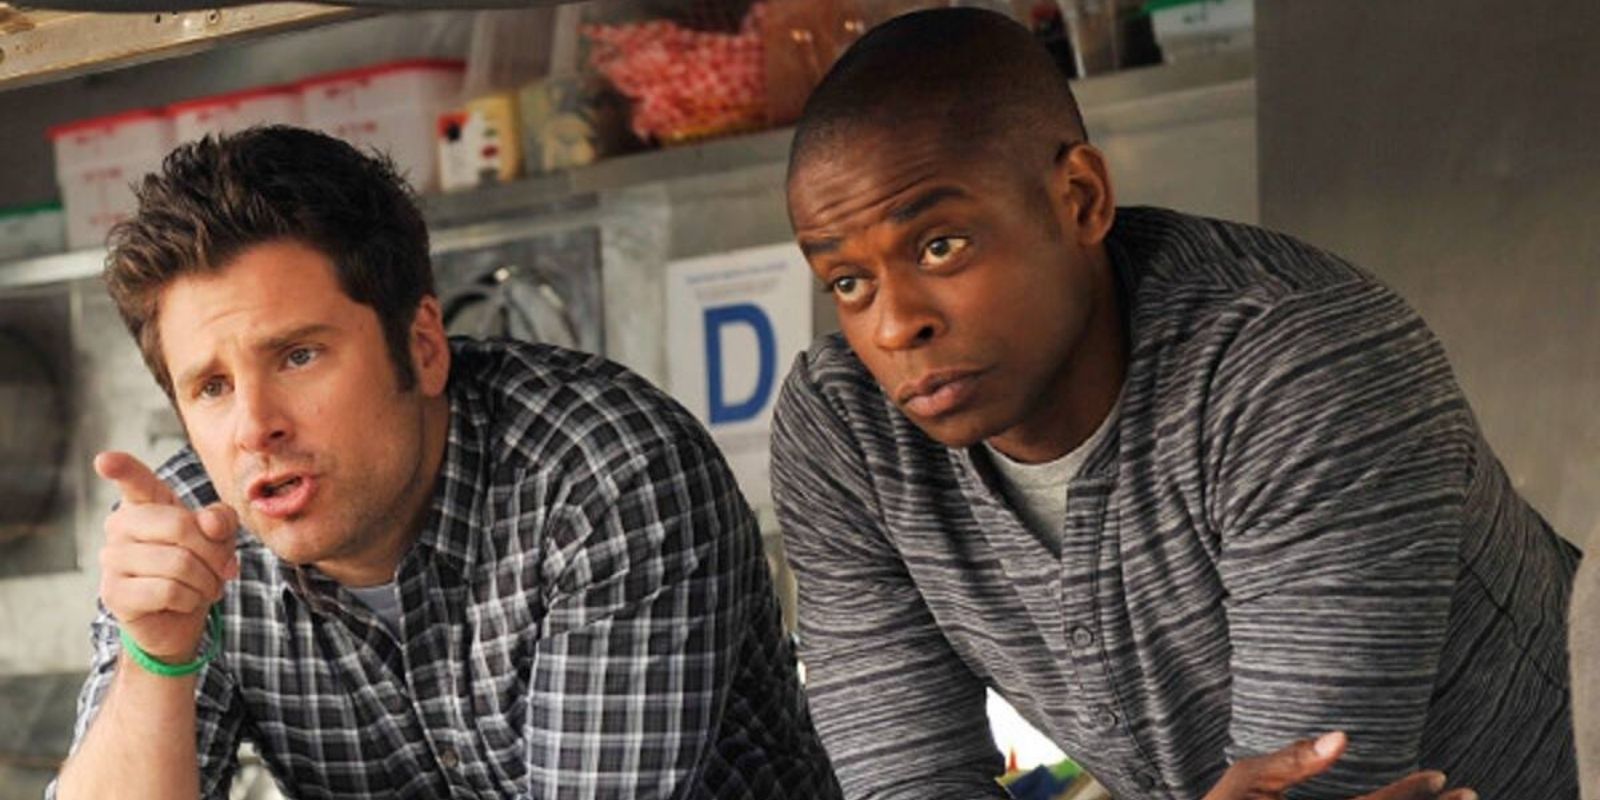 Shawn Spencer and Burton Guster in their food truck in Psych